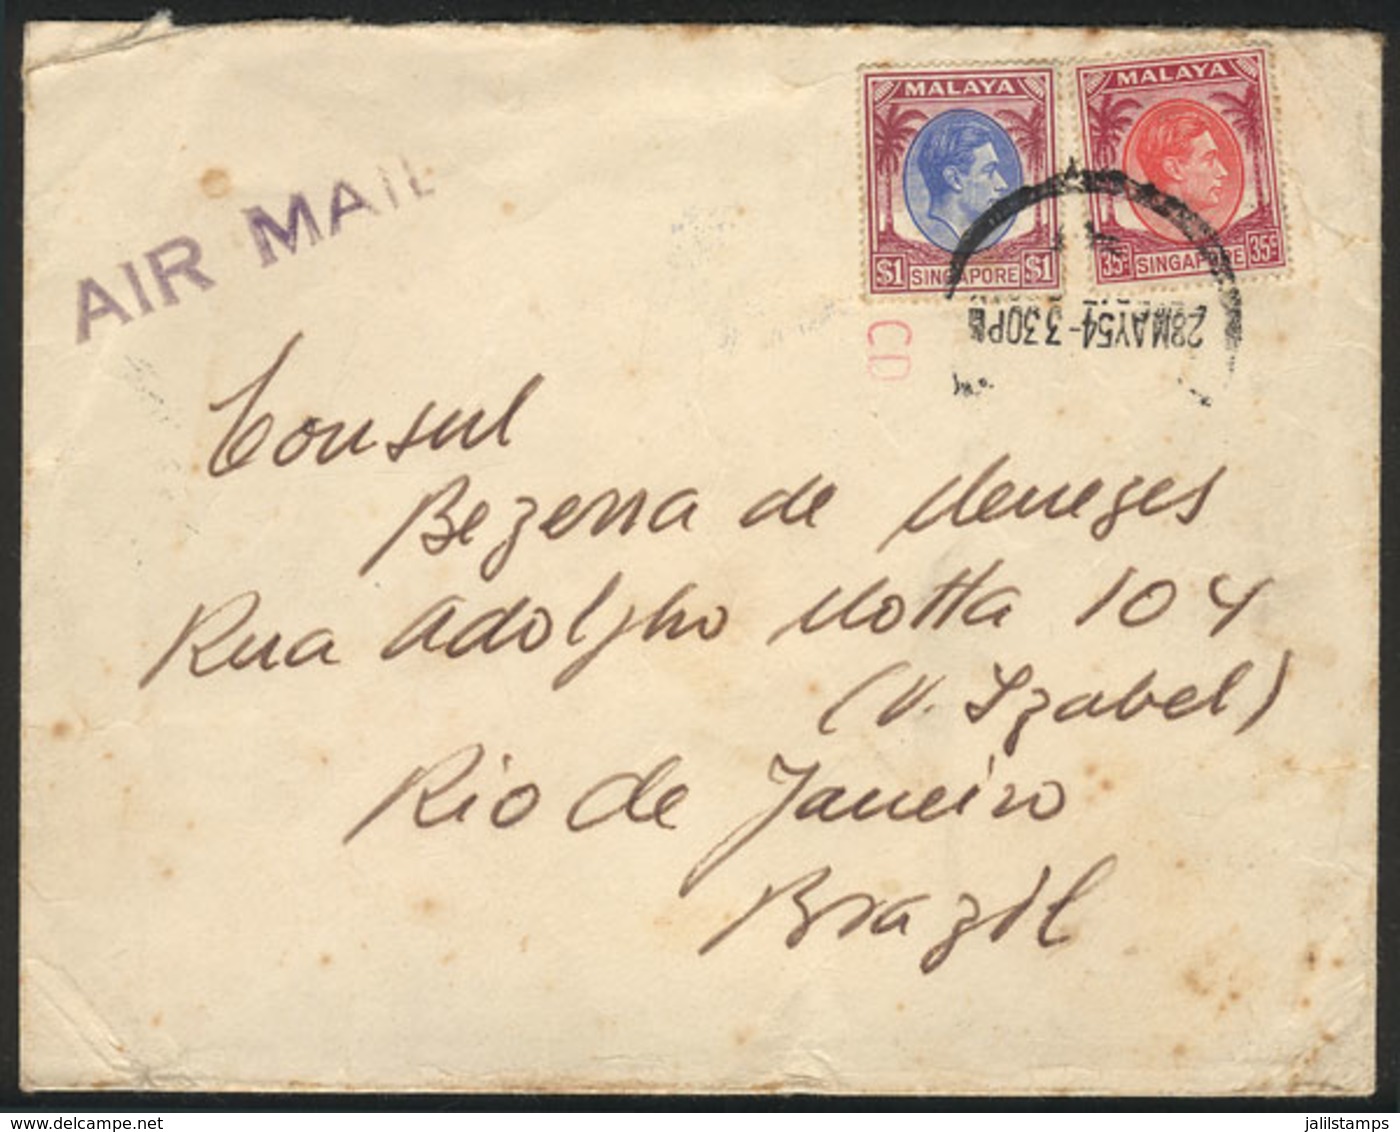 SINGAPORE: Airmail Cover Sent To Rio De Janeiro On 28/MAY/1954 Franked With $1.35, Unusual Destination! - Singapore (...-1959)